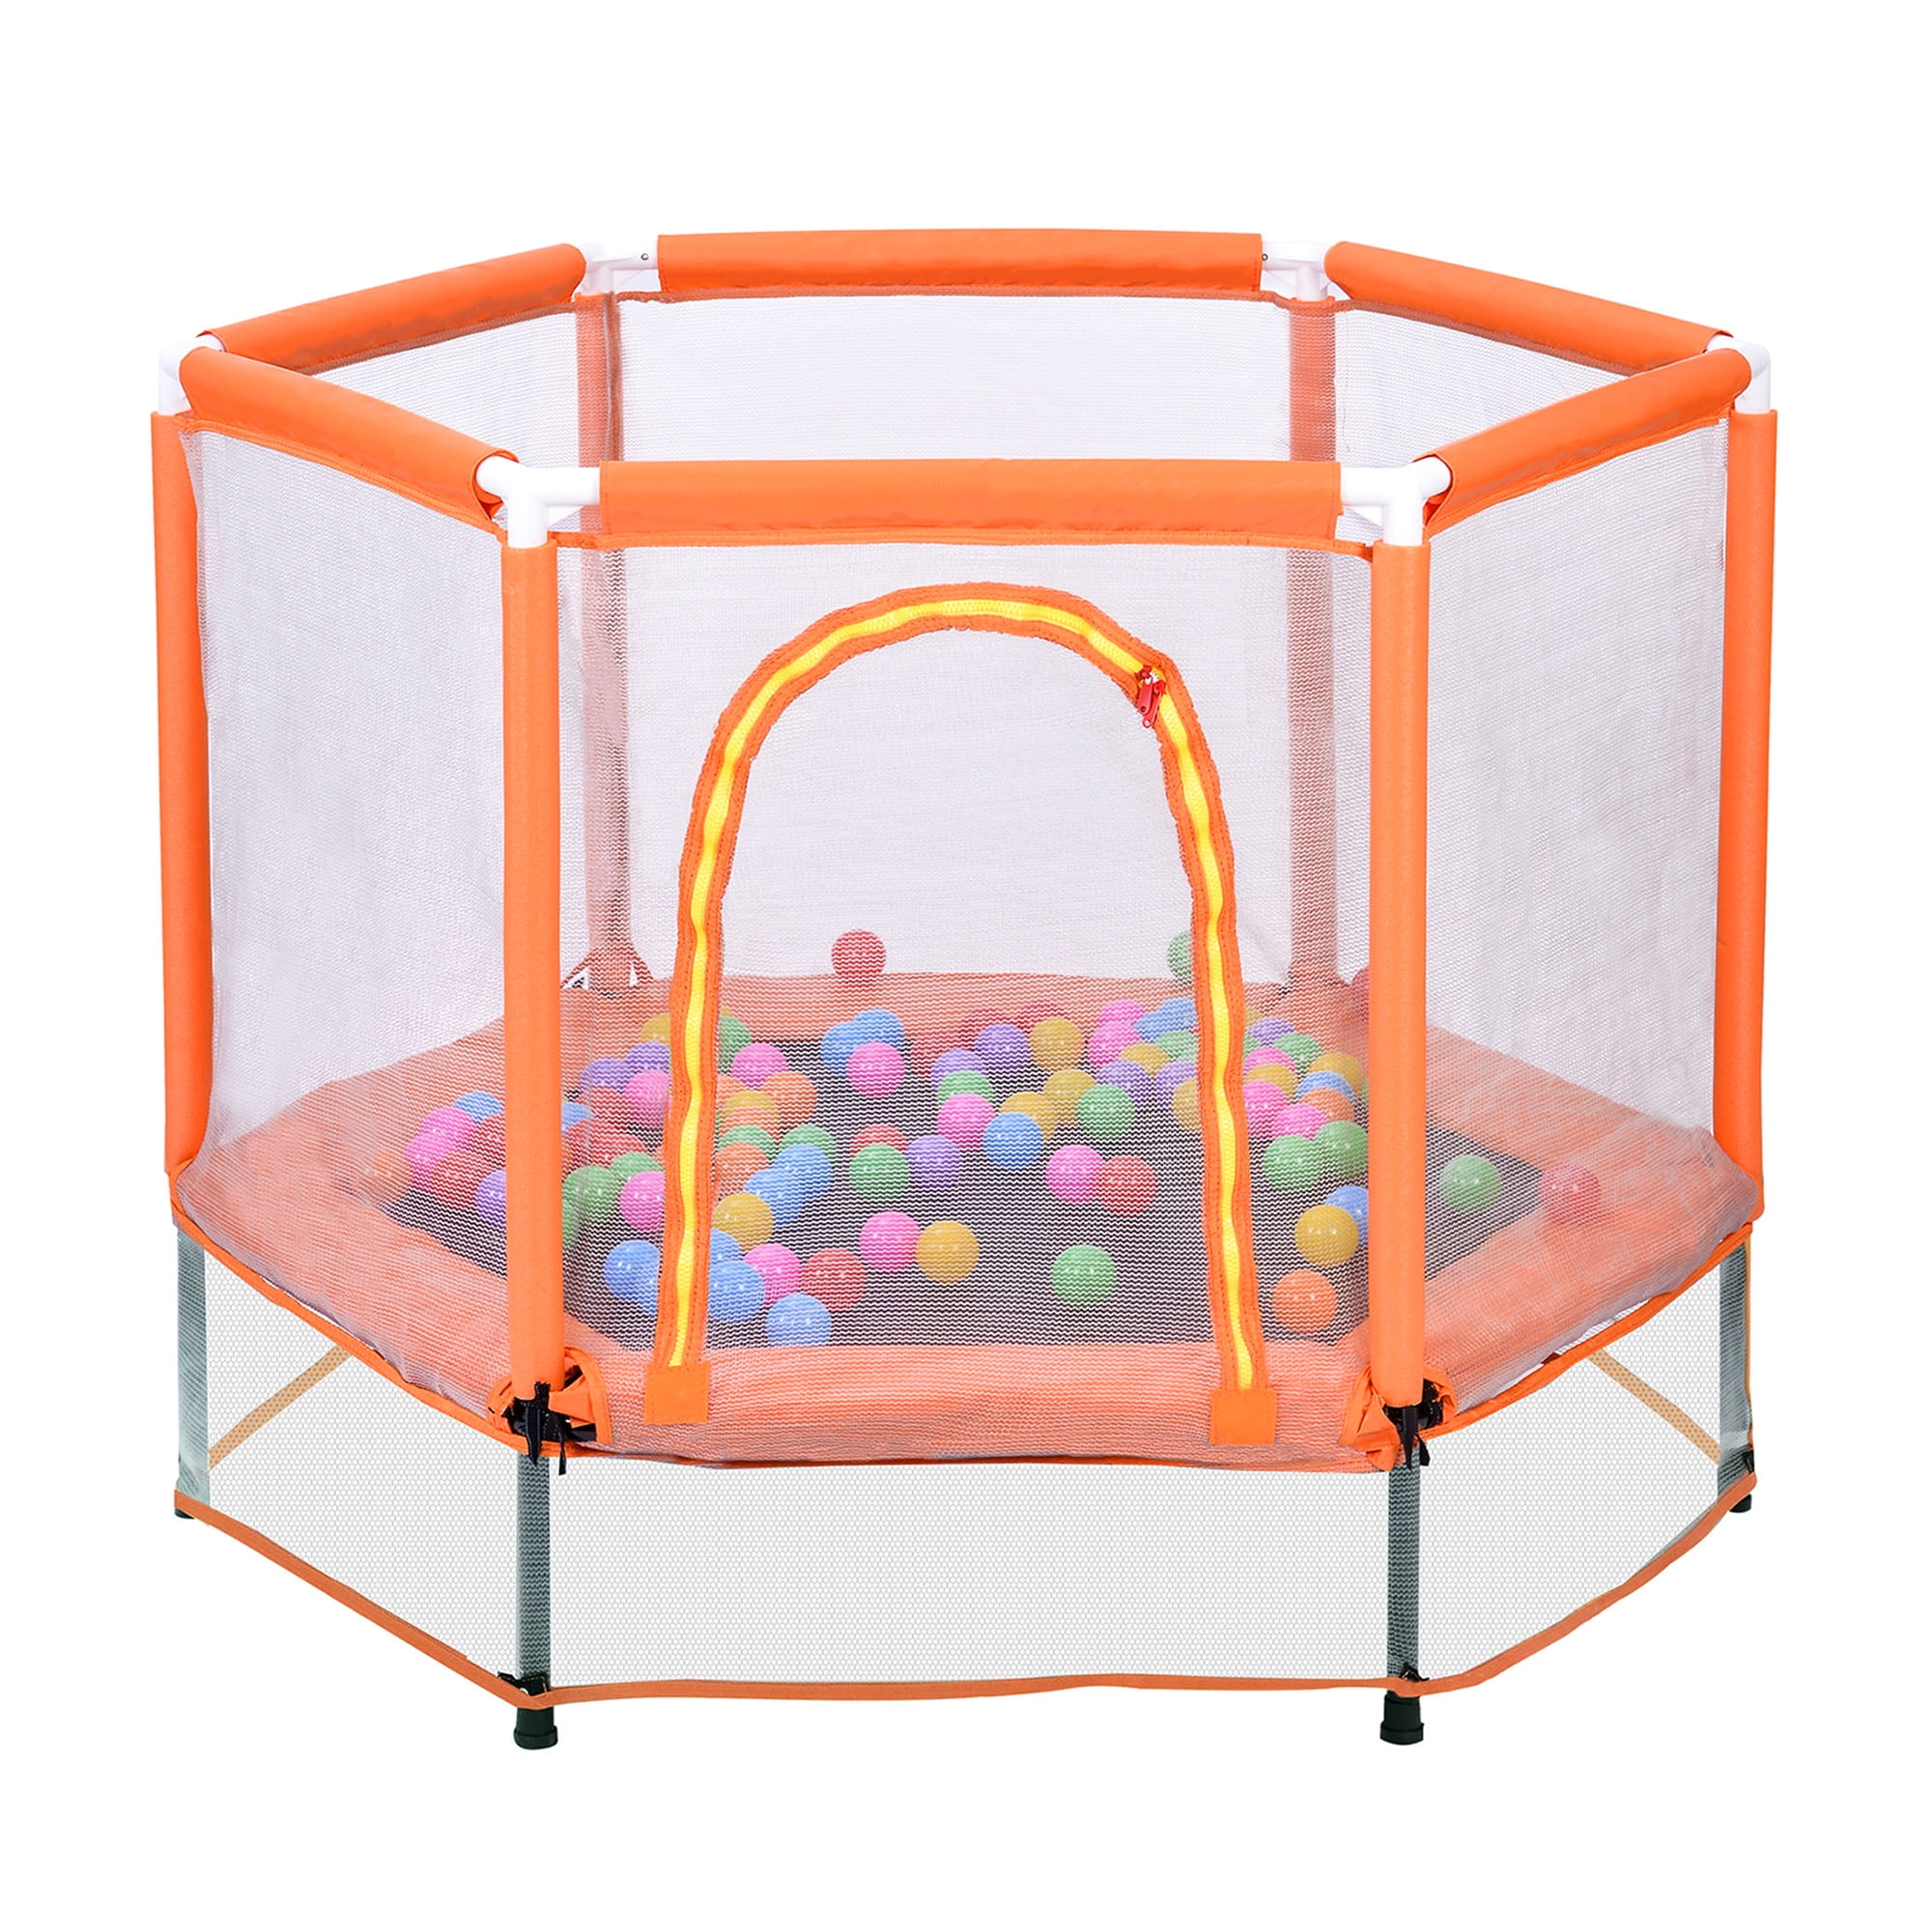 Musuos Children Trampoline with Safety Enclosure Net for Indoors and Outdoors